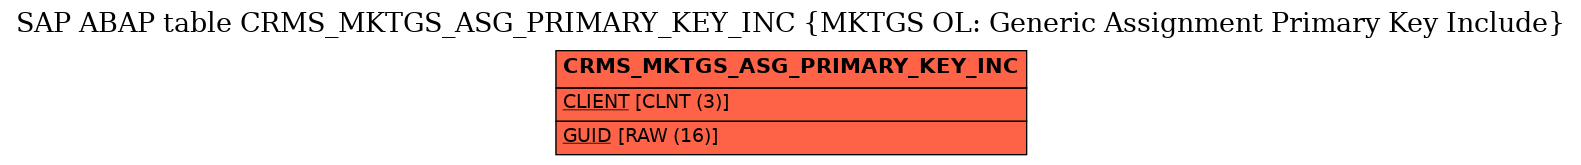 E-R Diagram for table CRMS_MKTGS_ASG_PRIMARY_KEY_INC (MKTGS OL: Generic Assignment Primary Key Include)